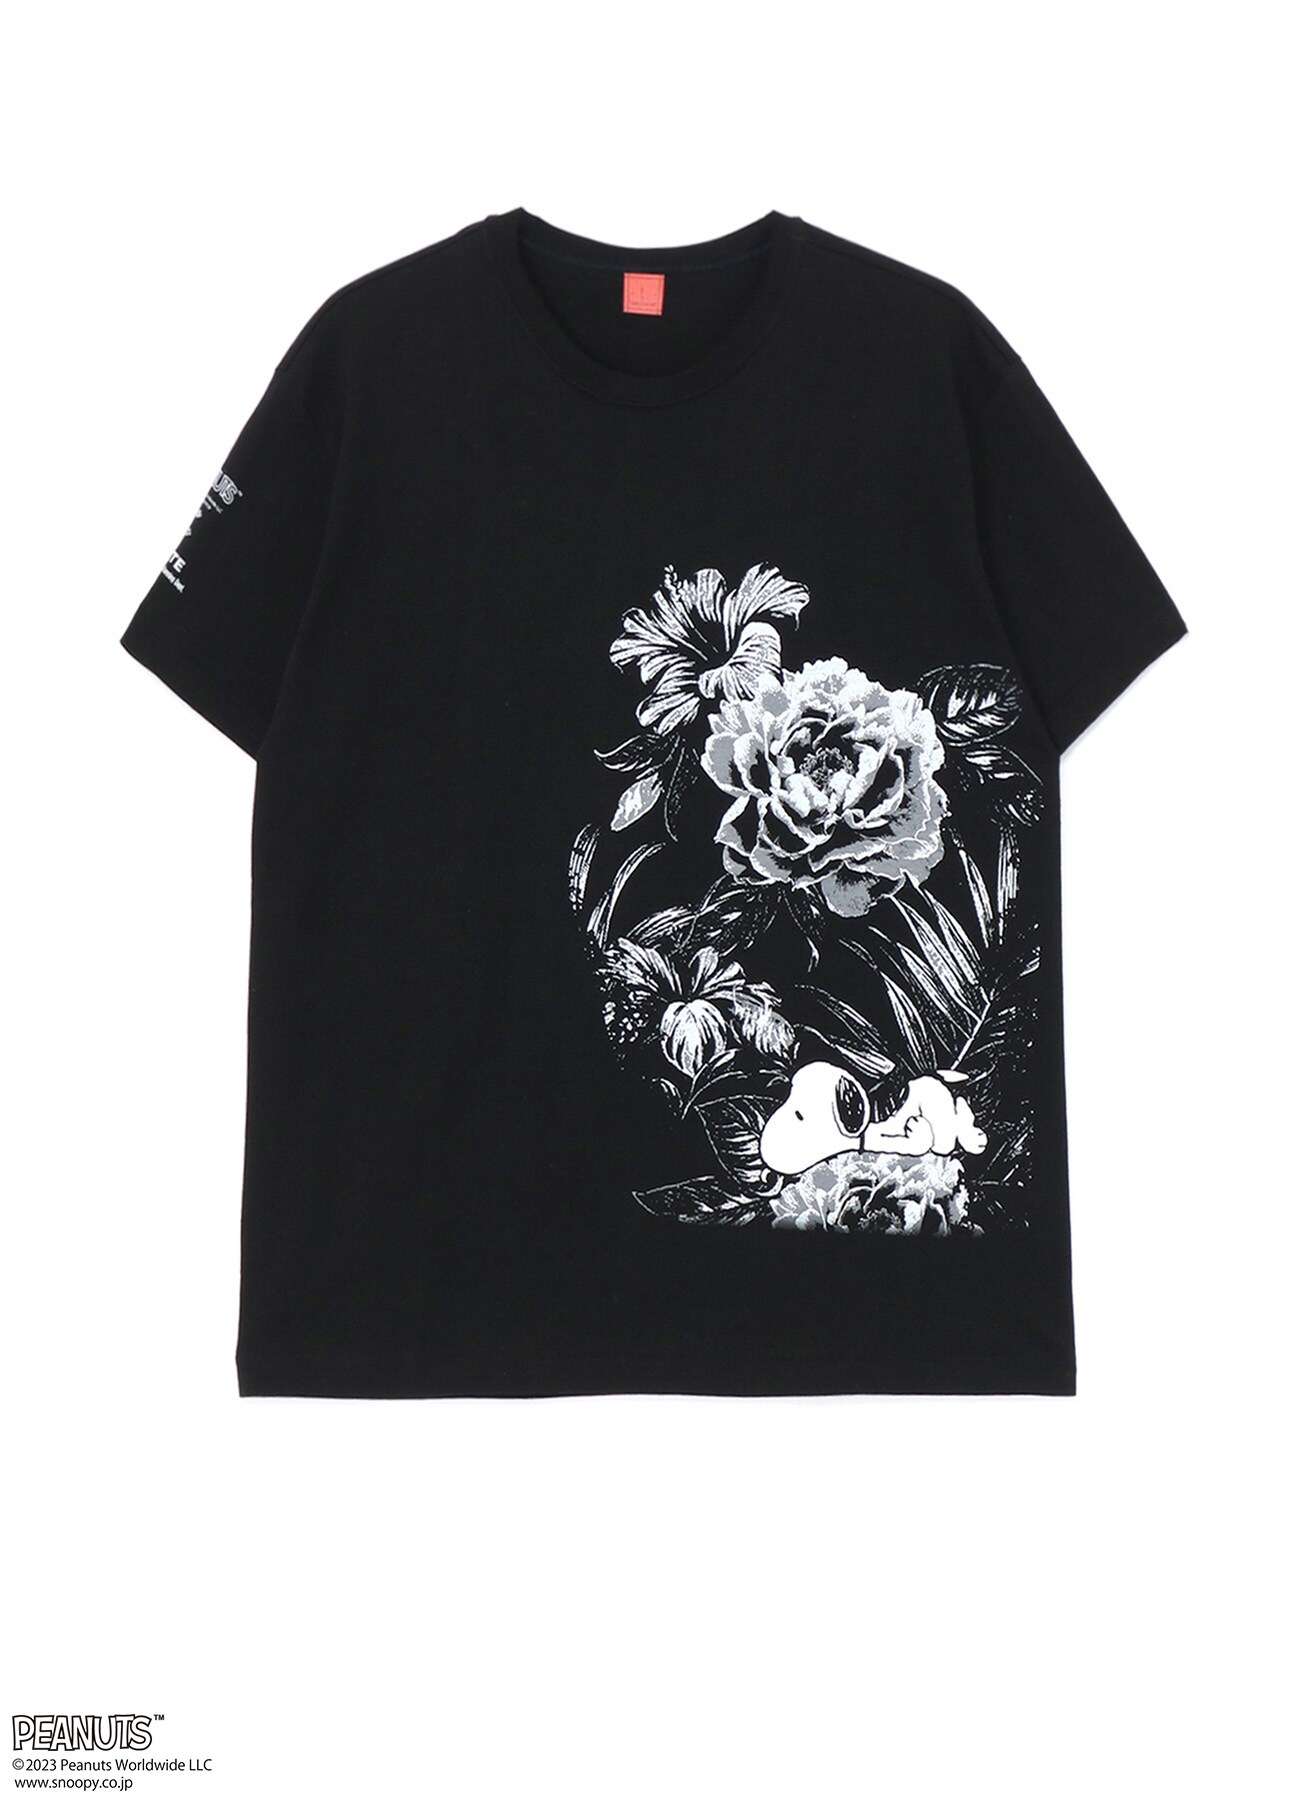 S'YTE x PEANUTS COTTON JERSEY SNOOPY LYING ON ALOHA FLOWER GRAPHIC T-SHIRT